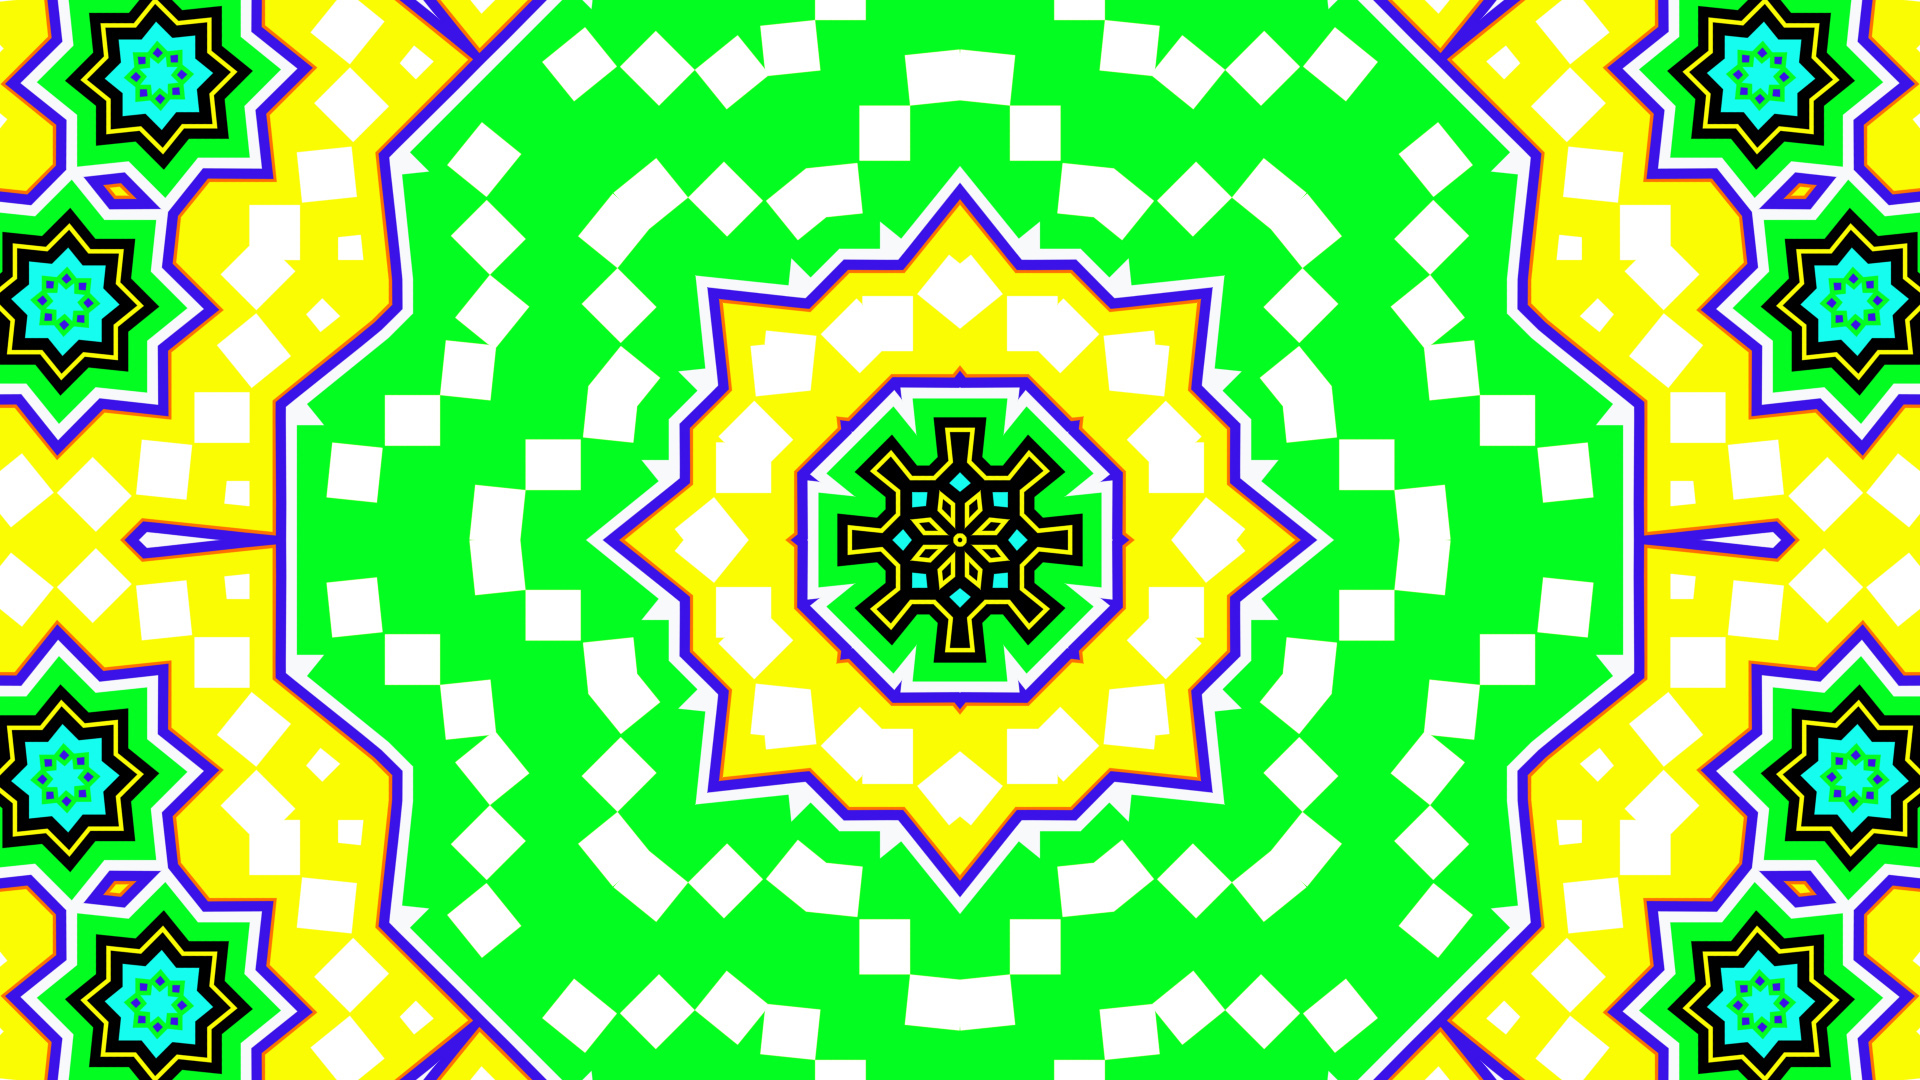 Green Yellow Shapes Kaleidoscope Colorful Digital Art HD Abstract